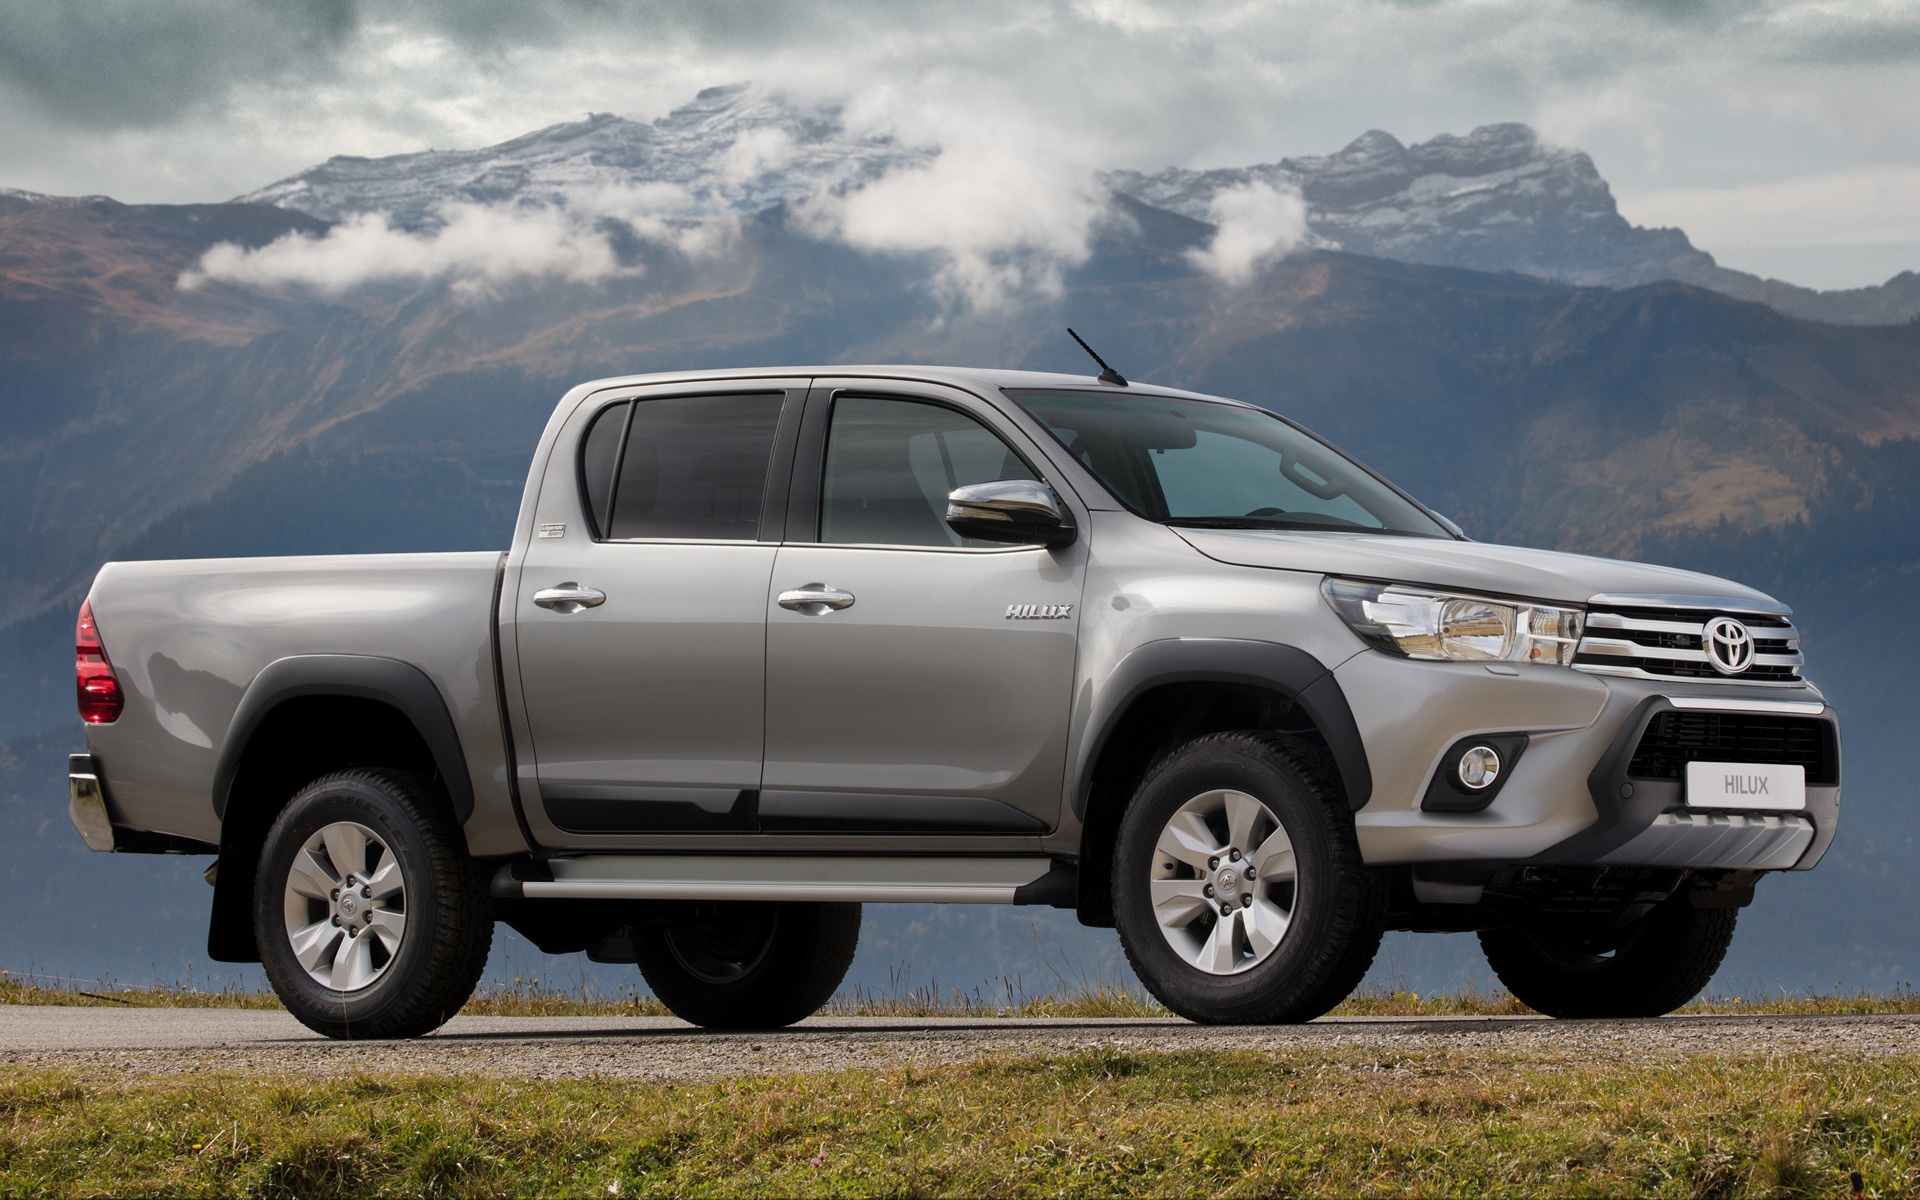 Toyota Hilux Double Cab Legende Sport and HD Image